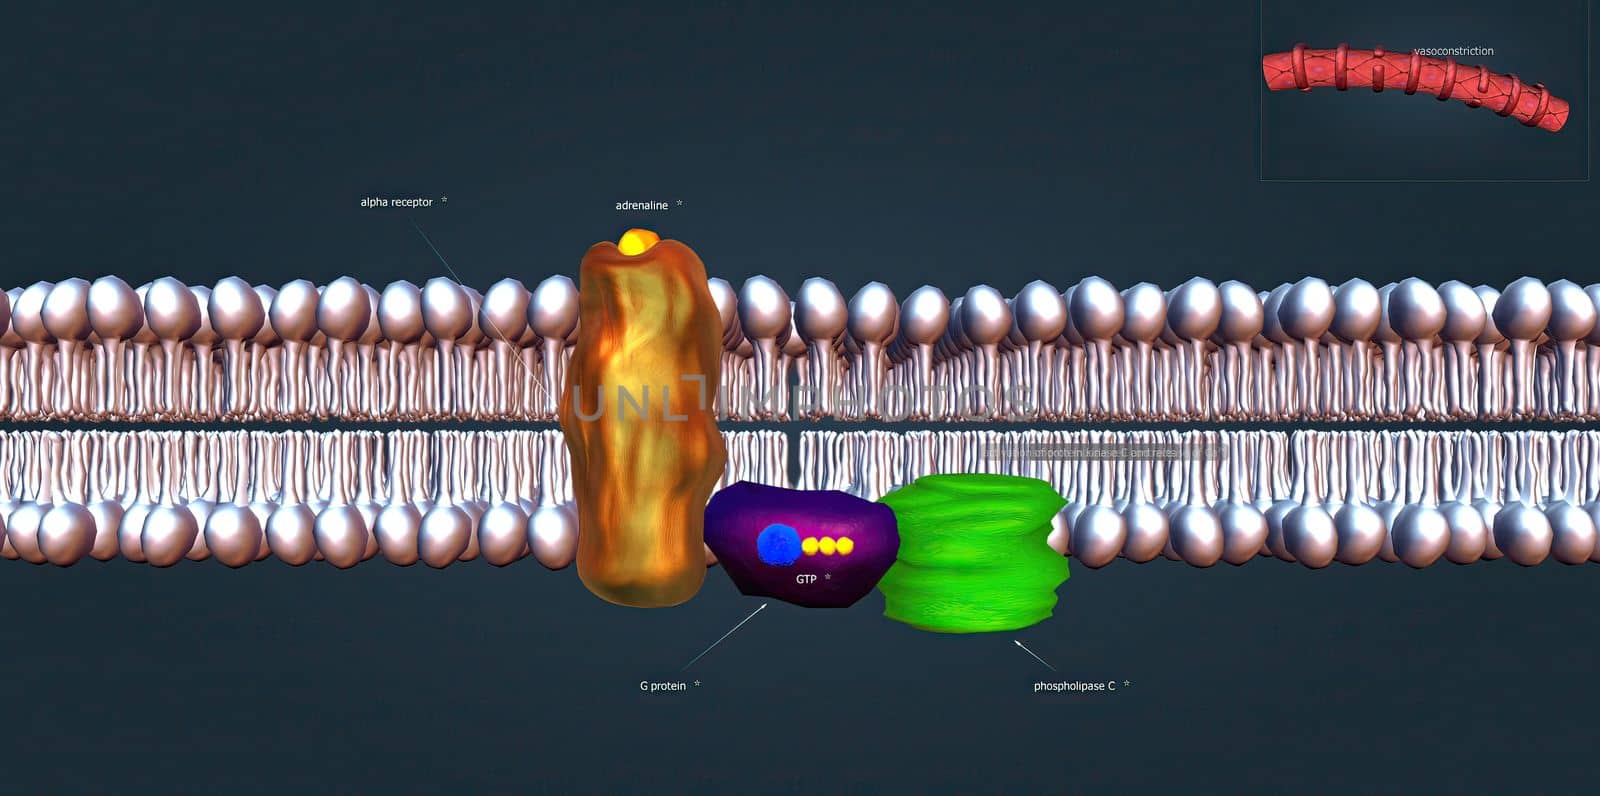 The beta 1 receptor is vital for the normal physiological function of the sympathetic nervous system. 3d illustration